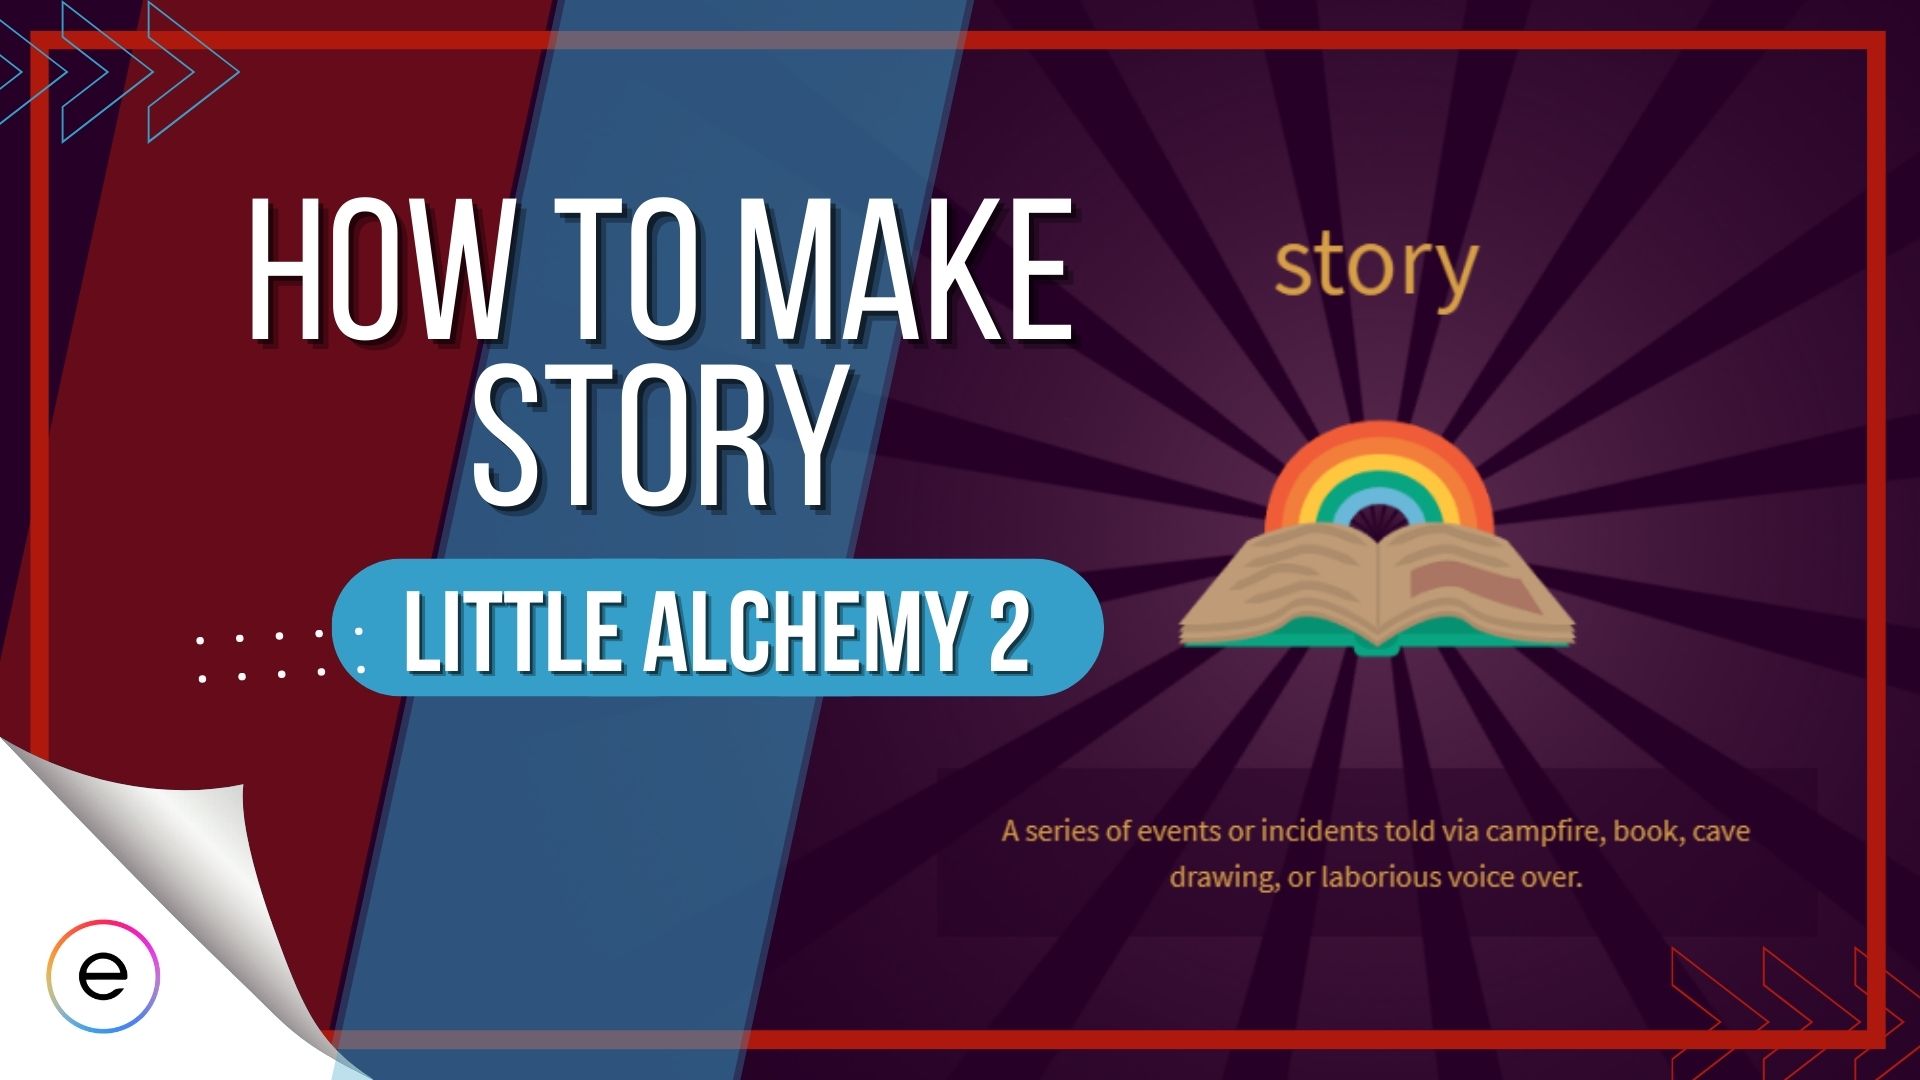 How to Make a Hero in Little Alchemy 2?